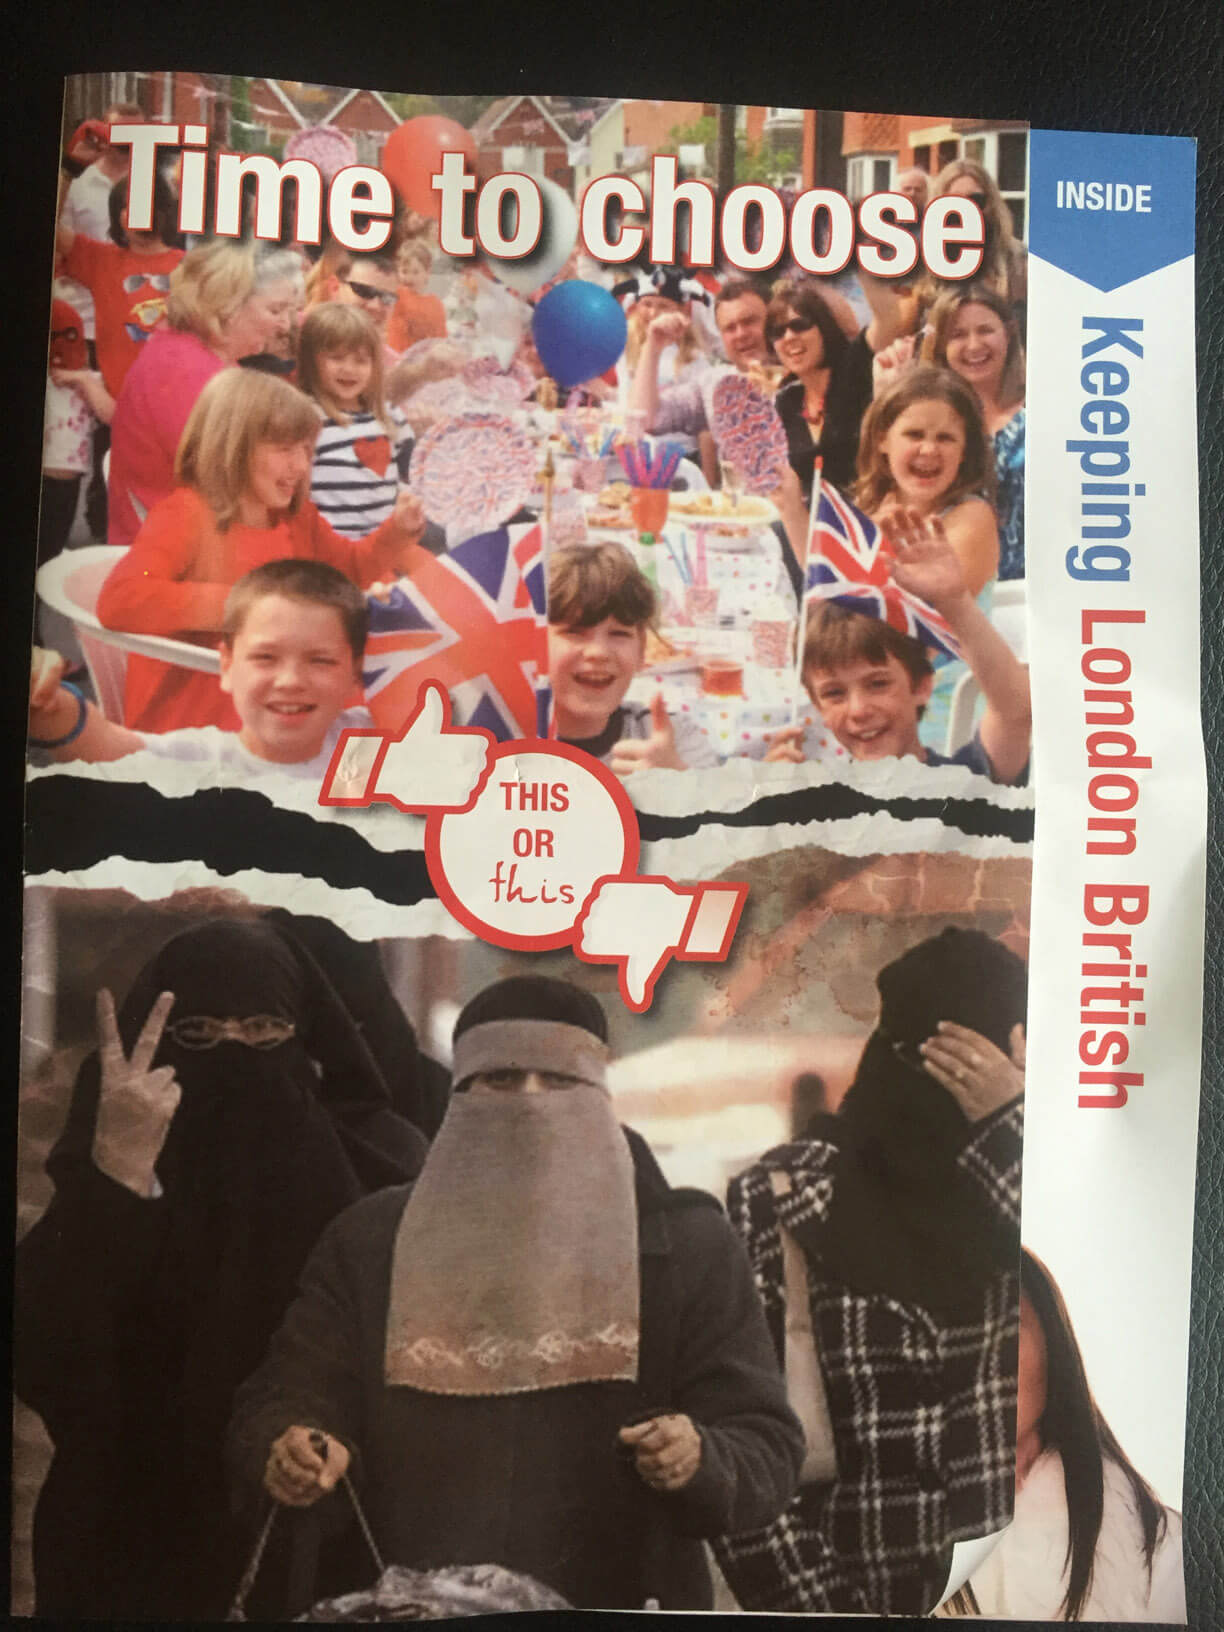 Vile British National Party Leaflet Shows How Extremist Groups Use Fear of Muslims